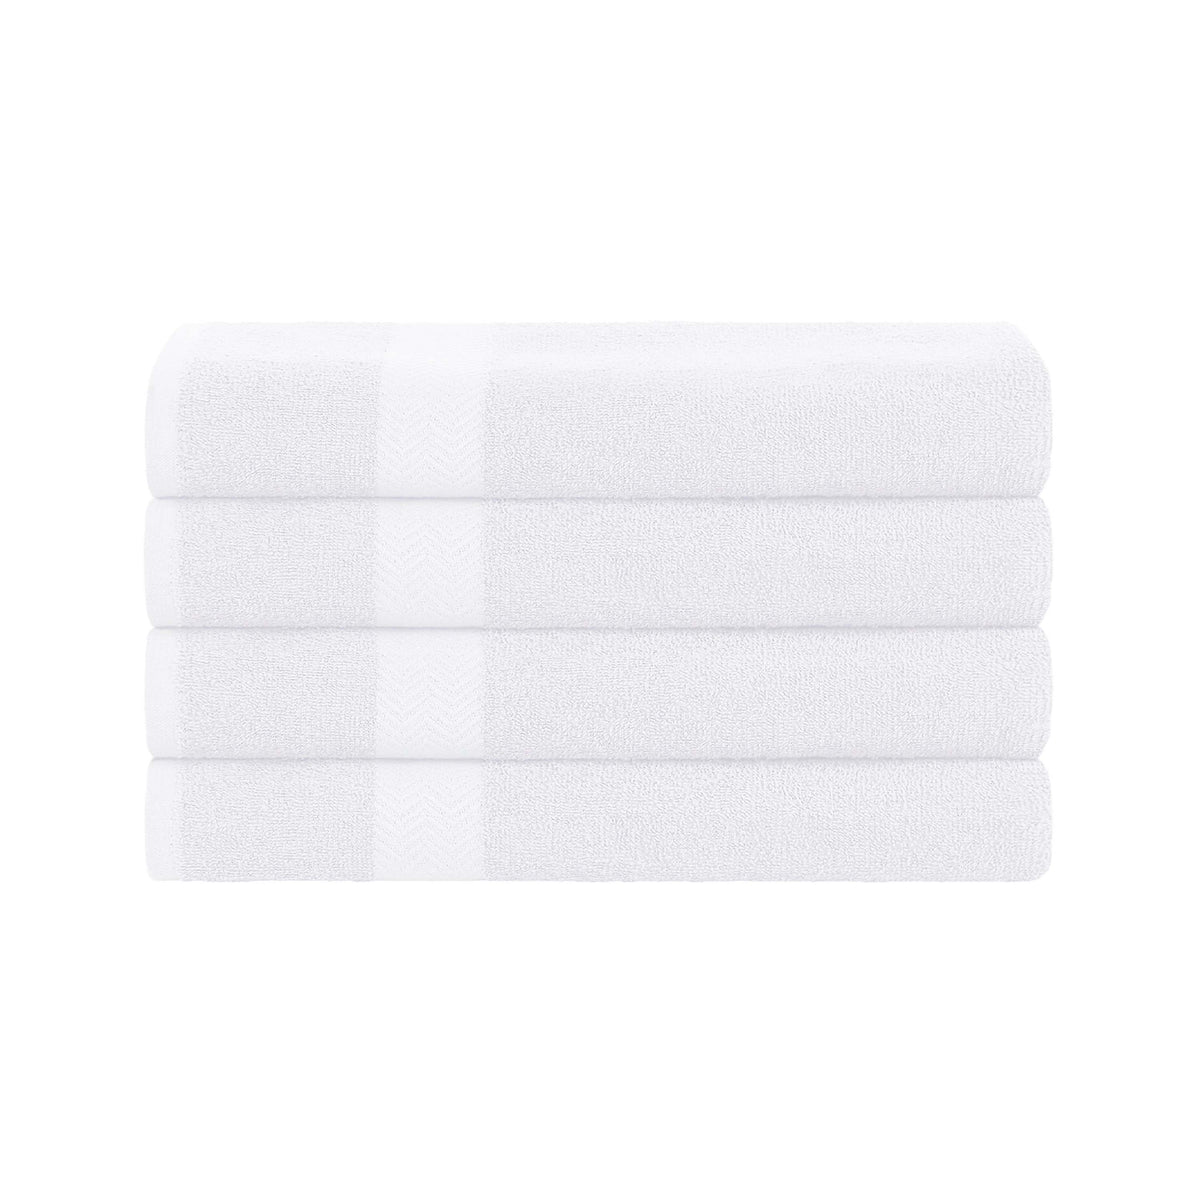 Cotton Highly Absorbent Eco-Friendly Quick Dry 4 Piece Bath Towel Set